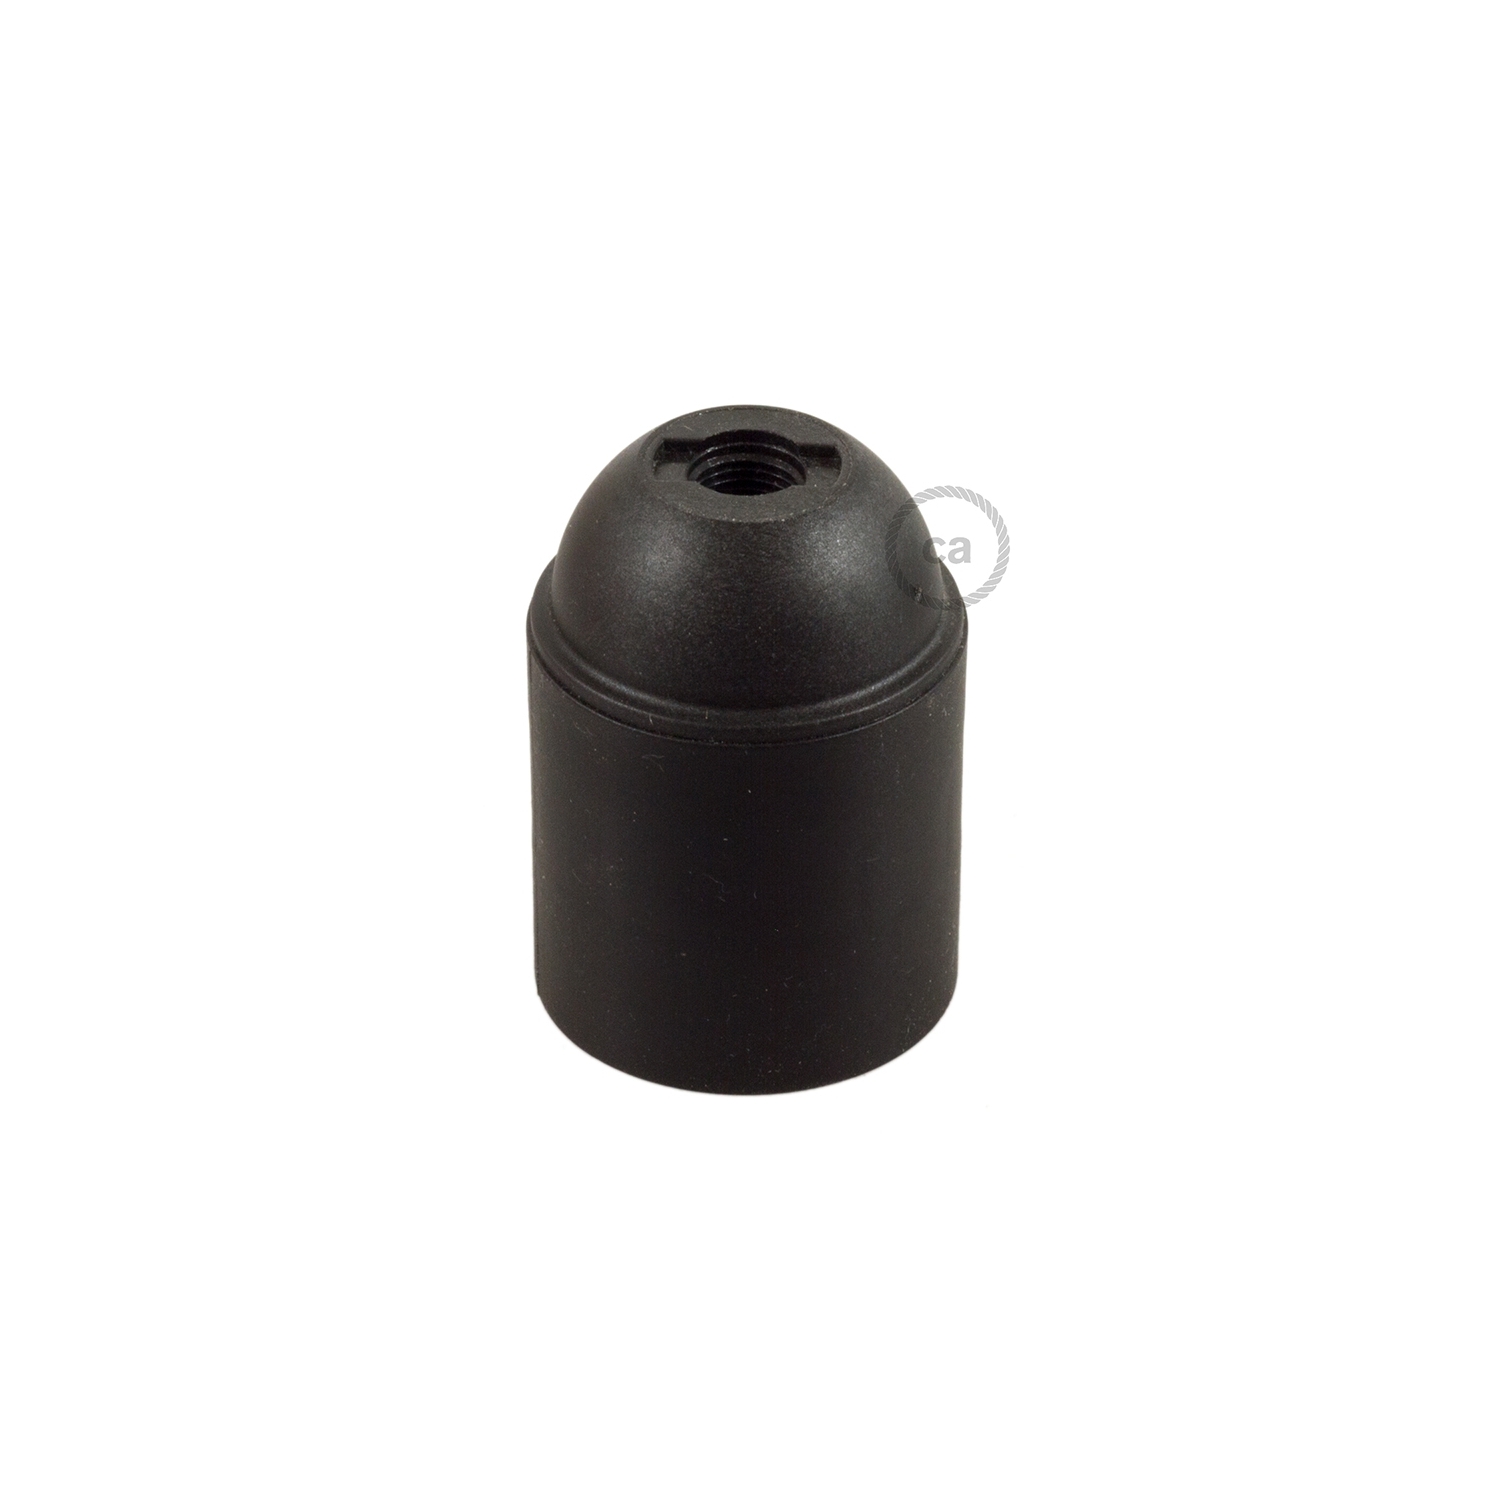 Smooth Sided Thermoplastic light bulb socket - E26